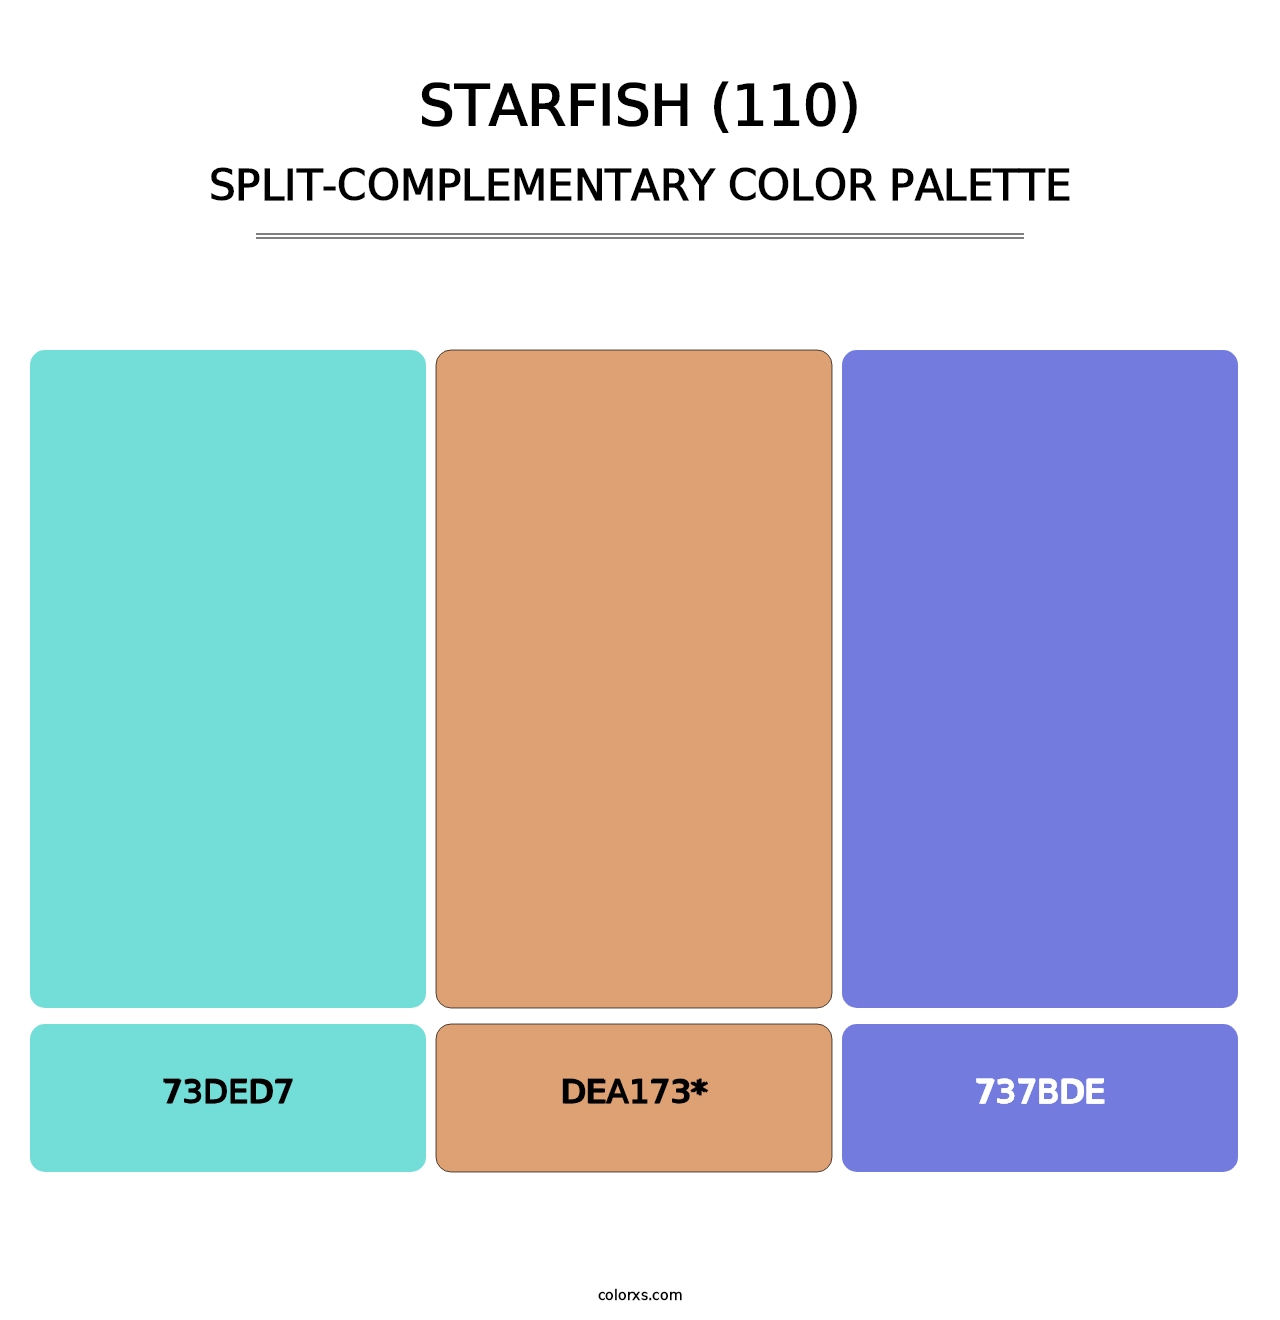 Starfish (110) - Split-Complementary Color Palette